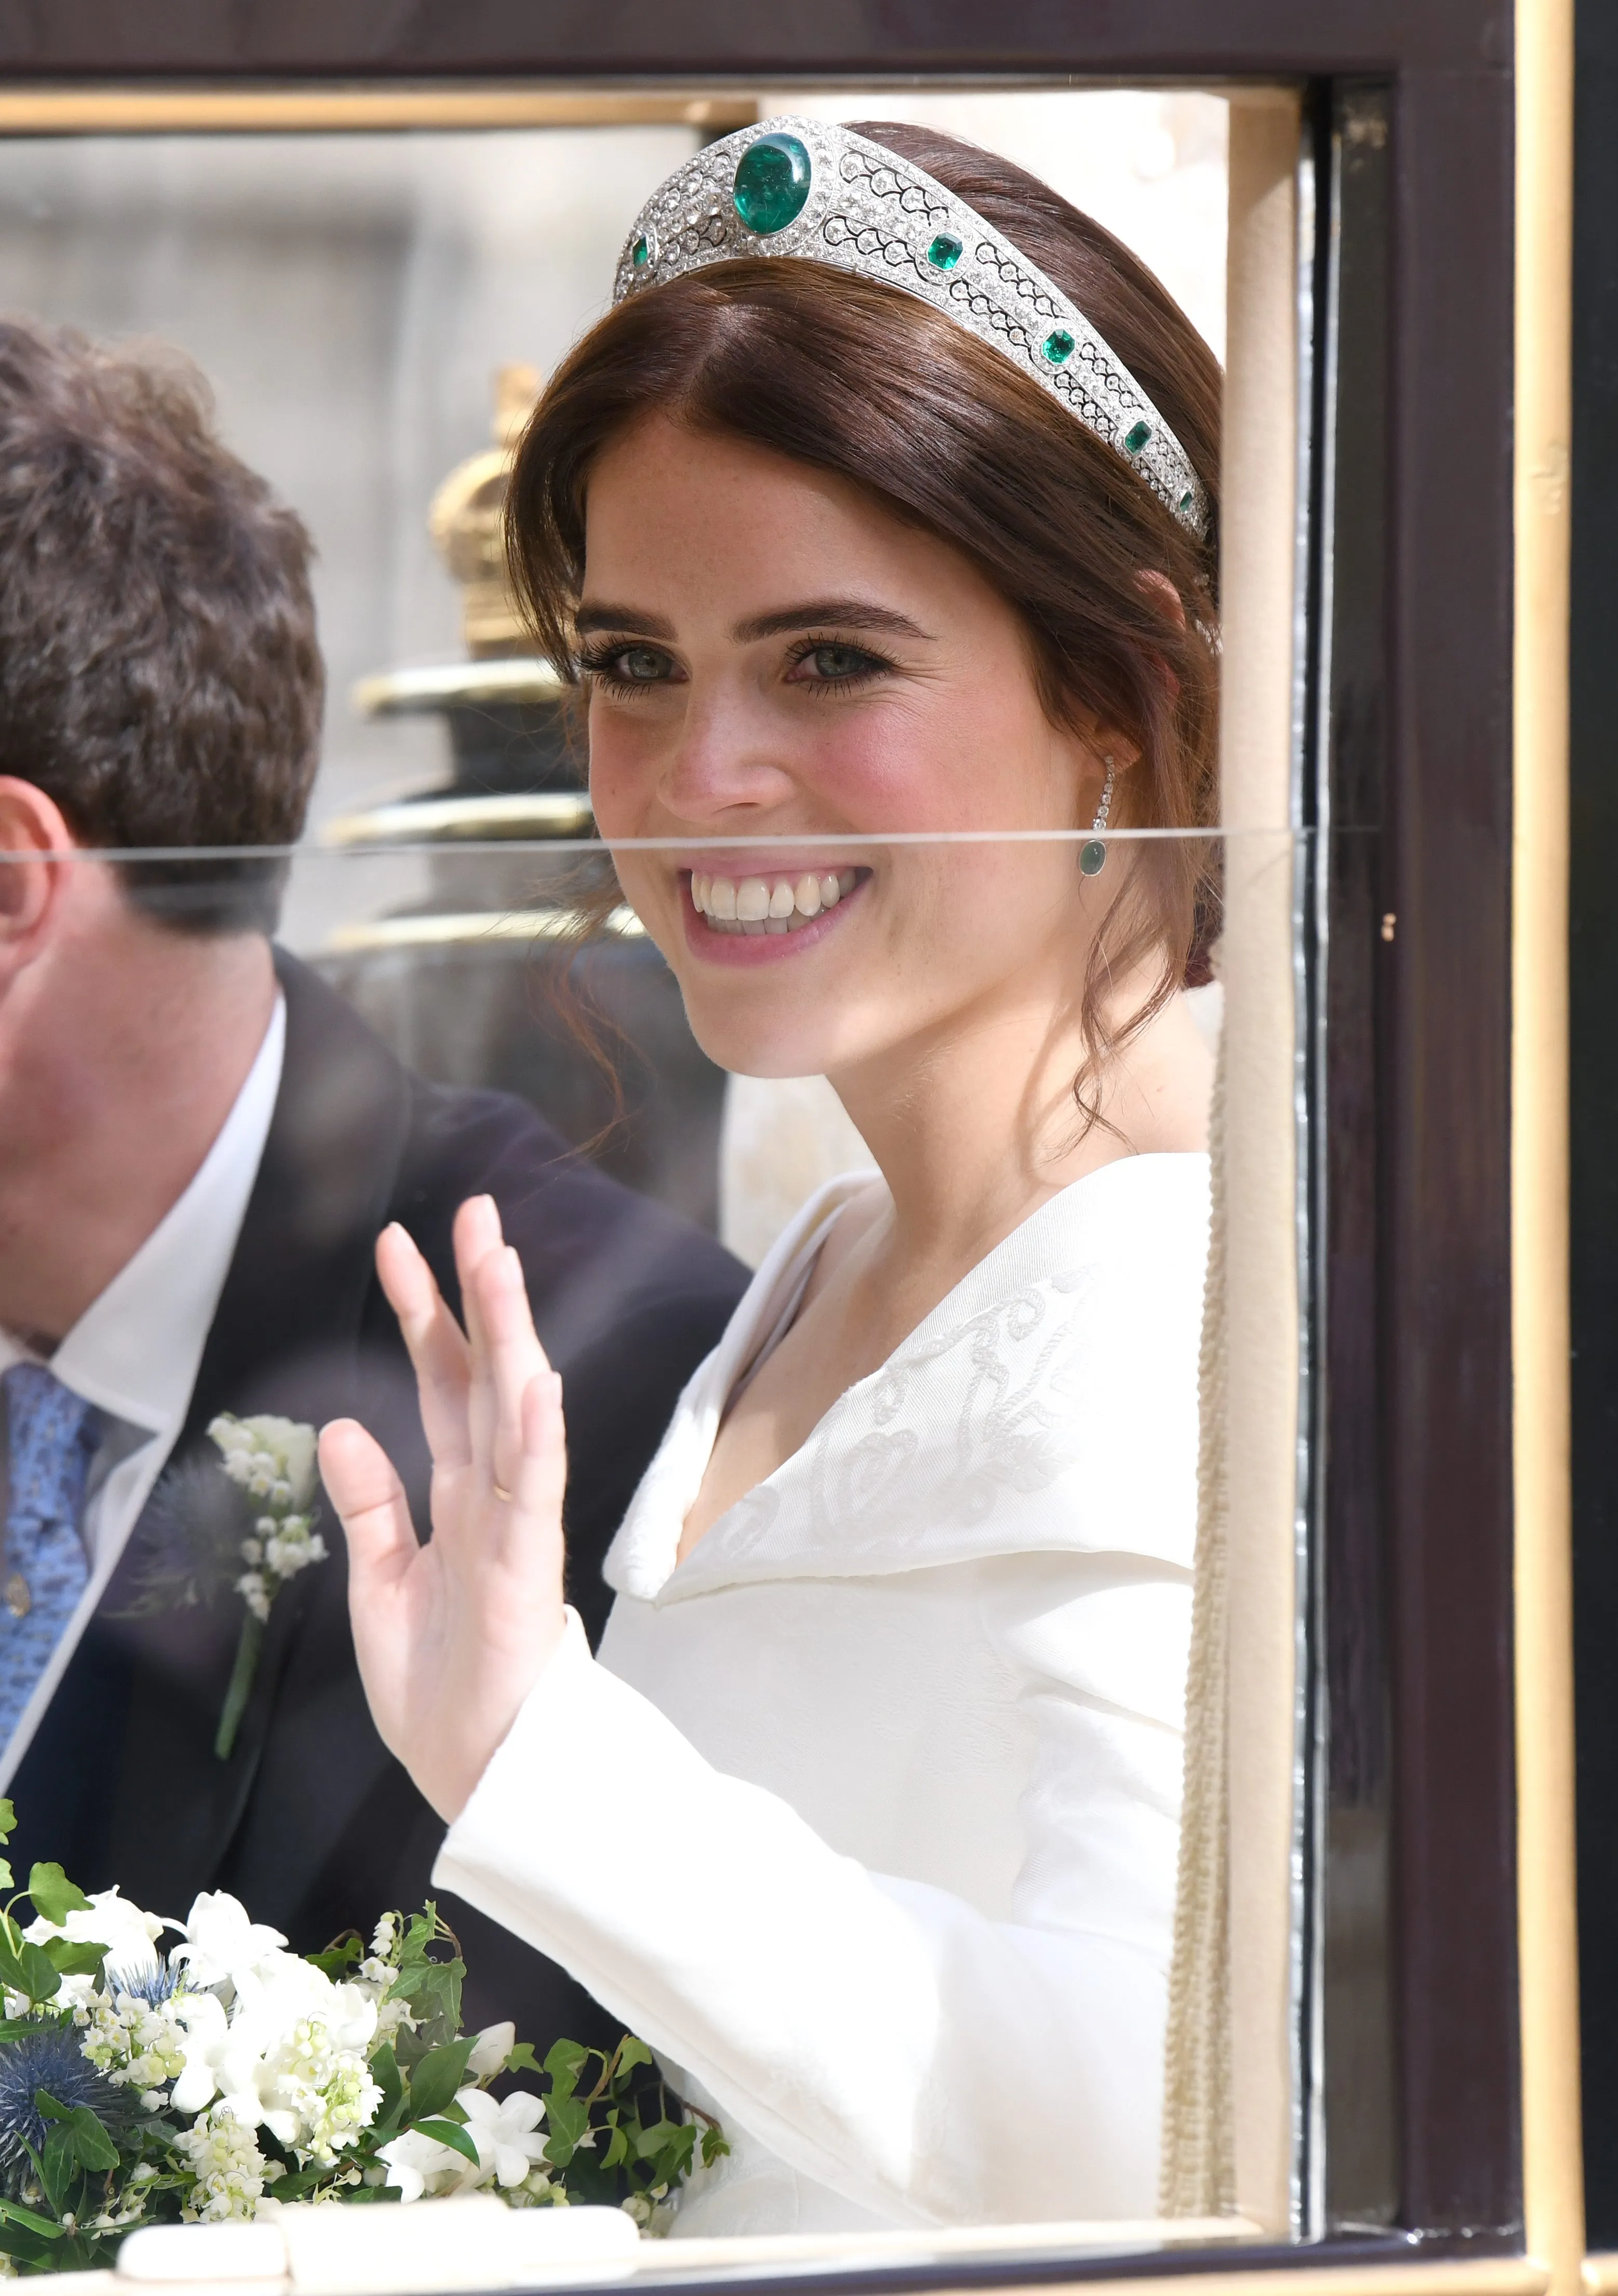 Royal Brides With Show-stopping Wedding Tiaras: Princess Anne, Meghan  Markle More HELLO!